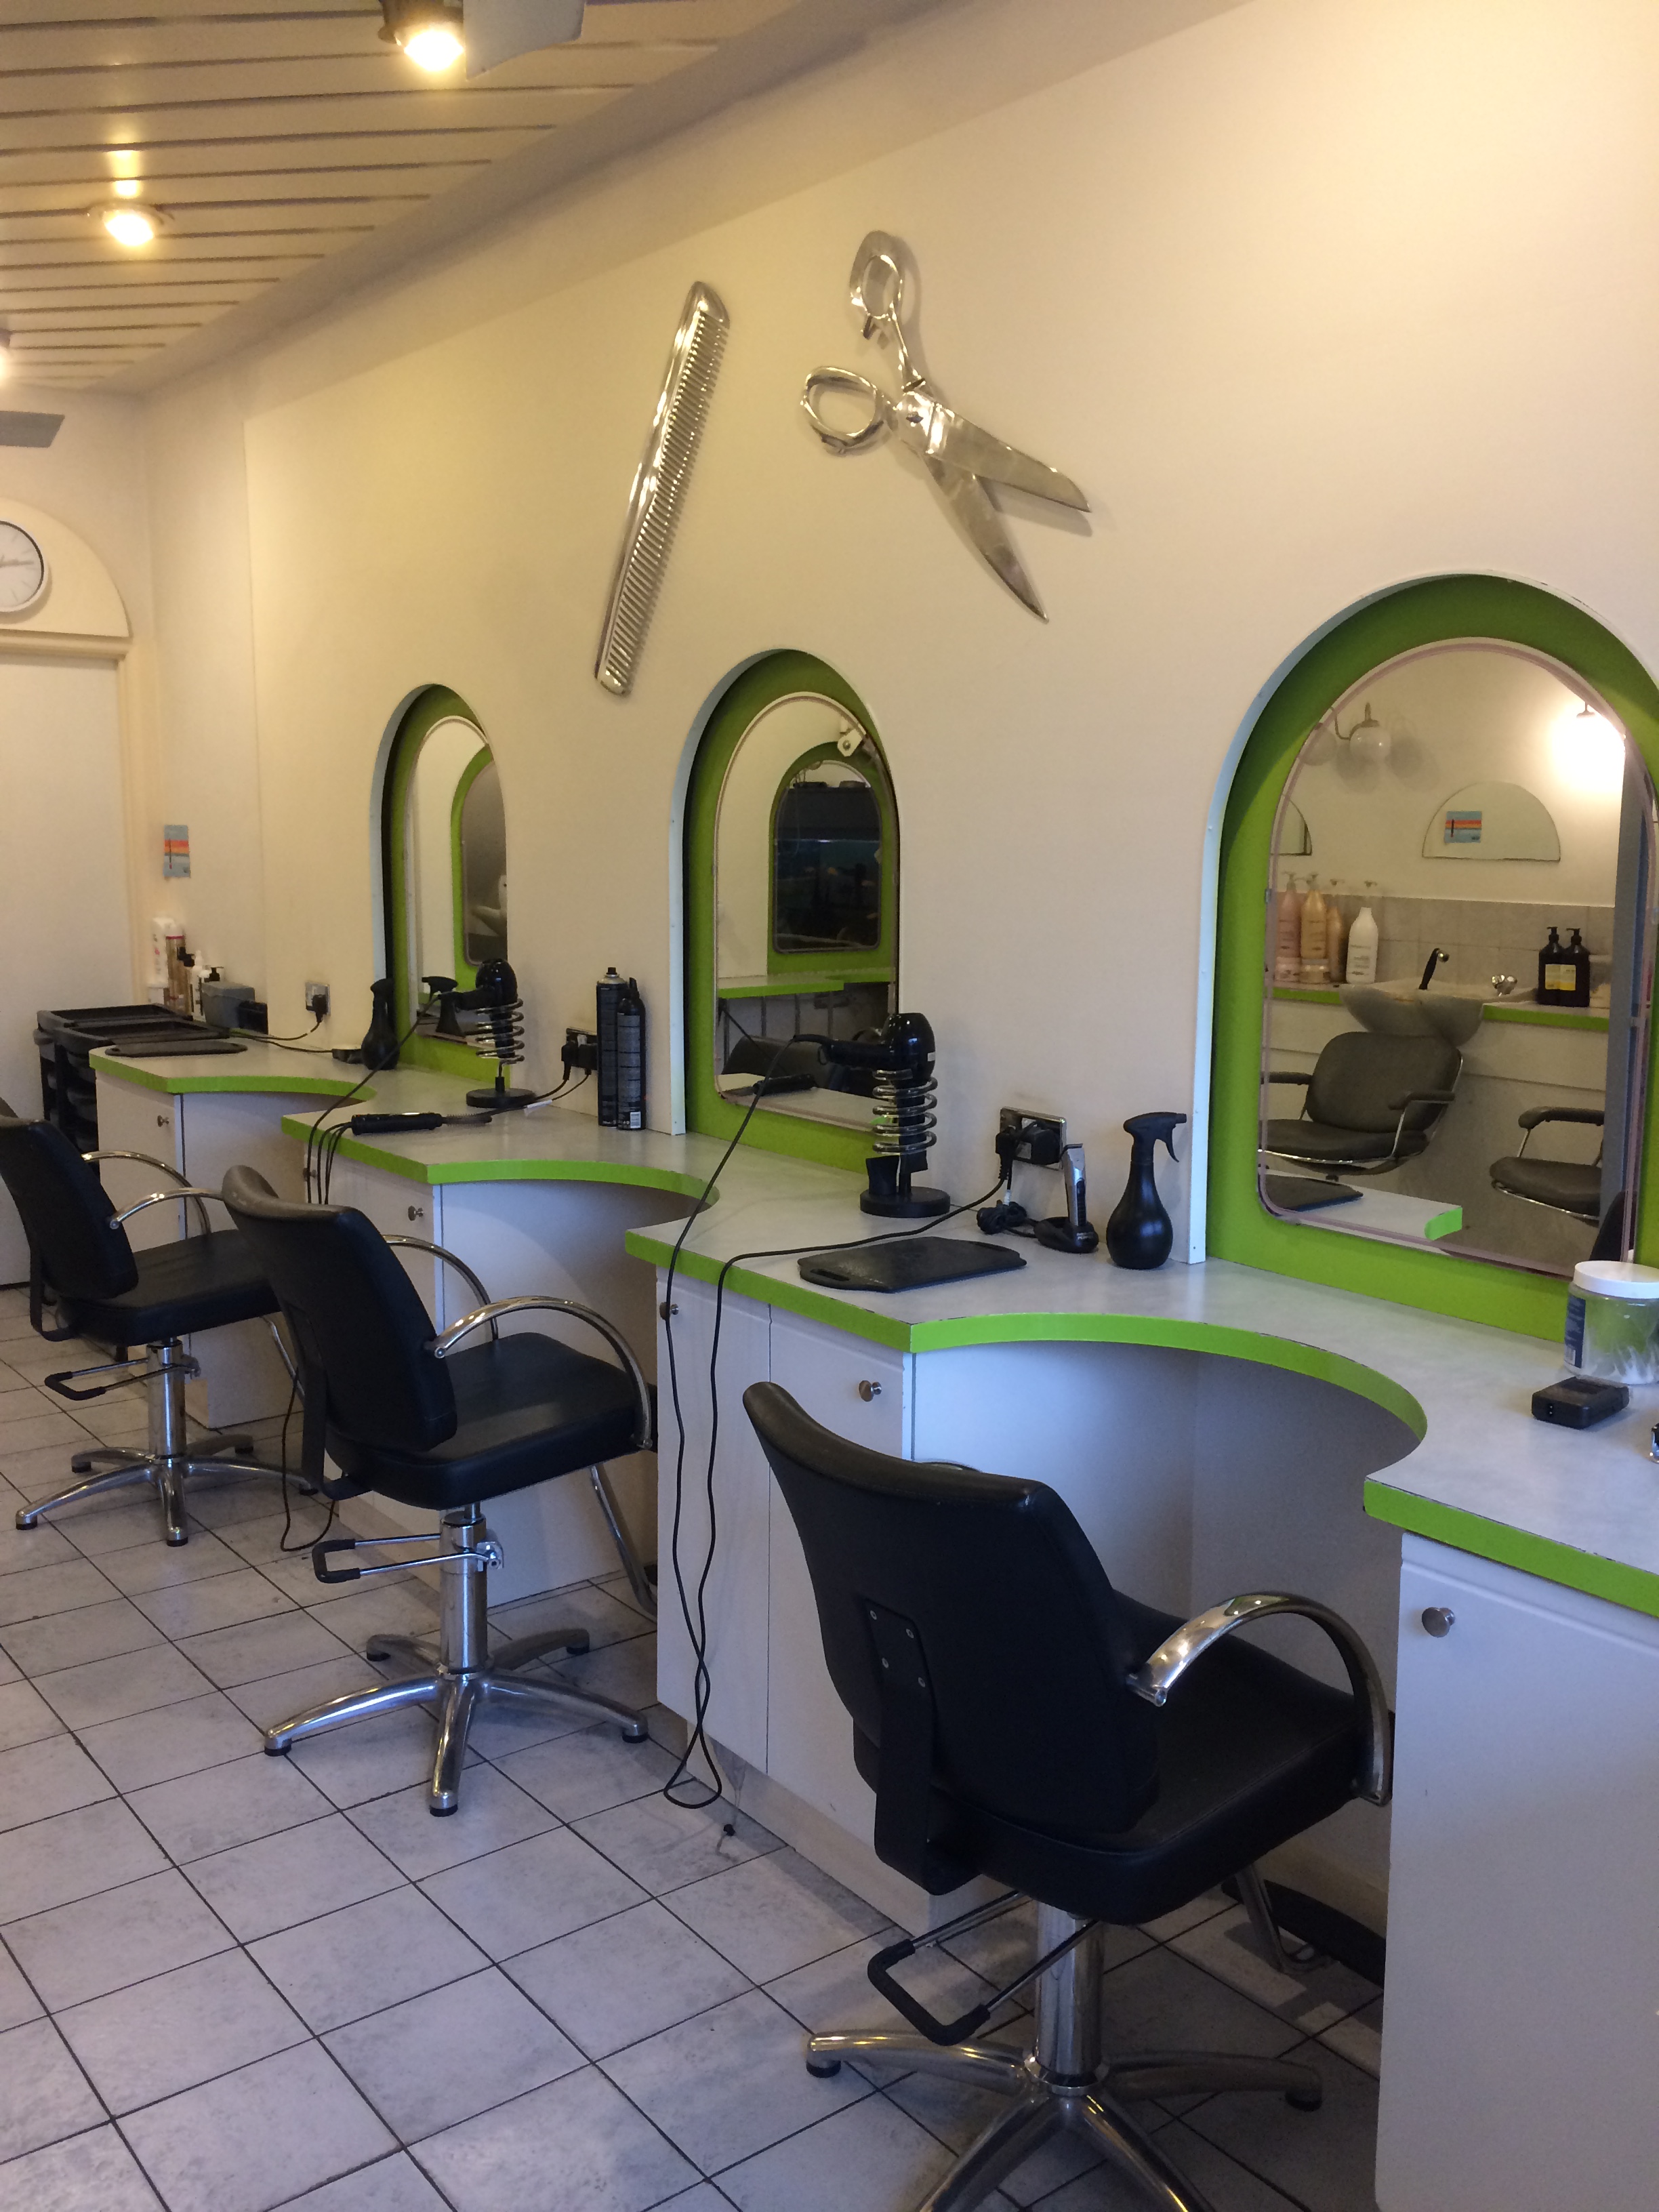 About - Eclips Hairdressing - Hair Restyling Experts - Newhaven, UK